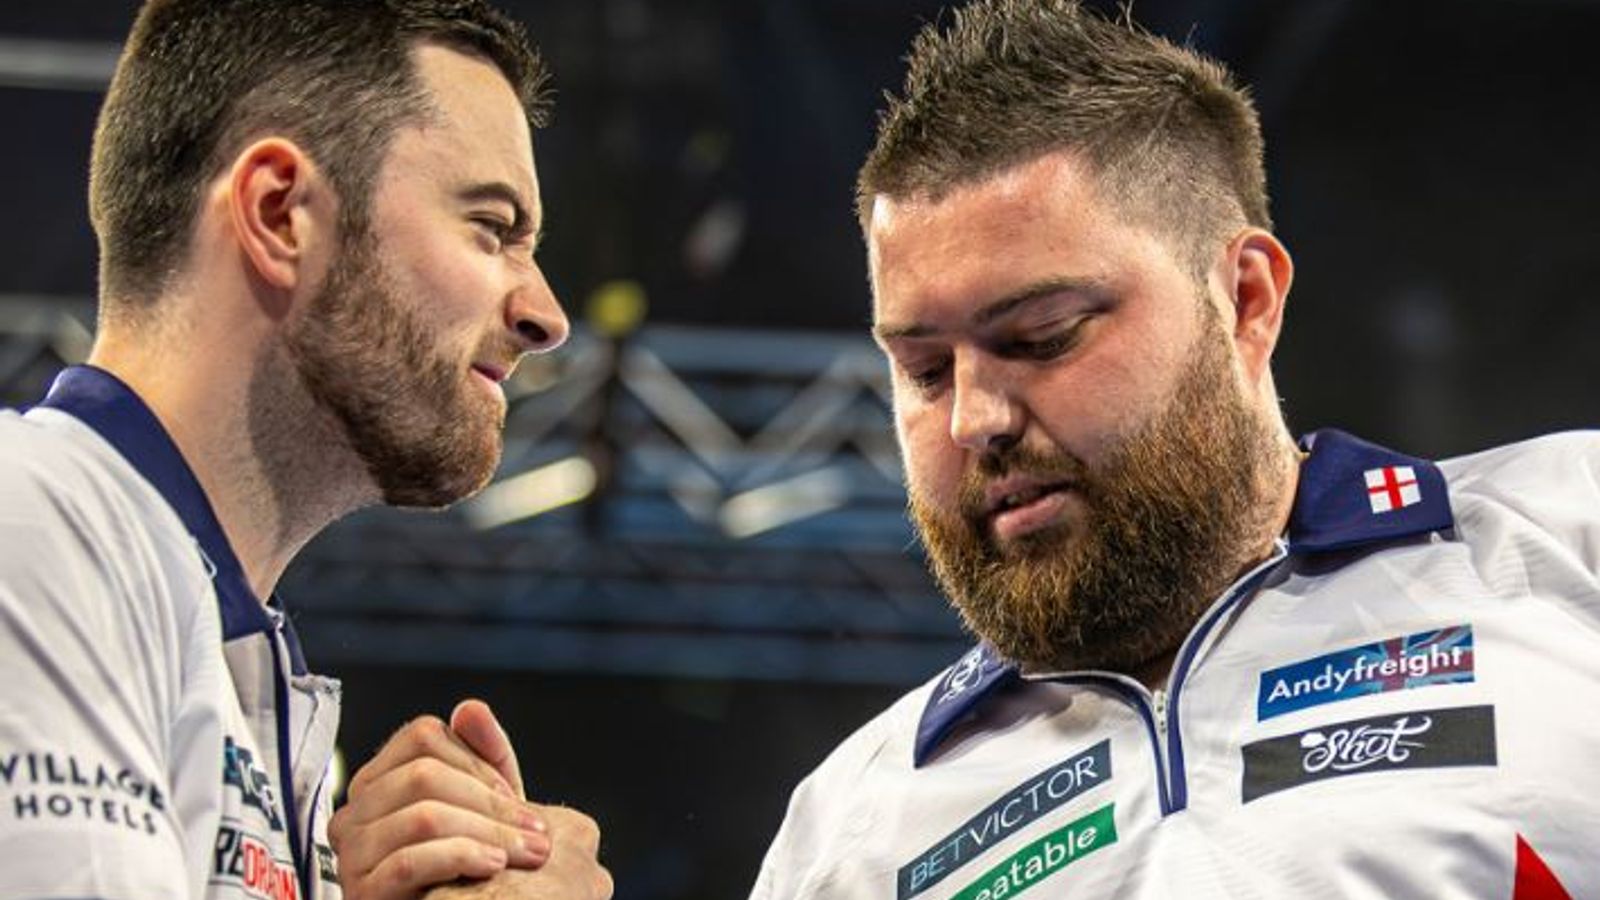 World Cup of Darts: Defending champs Wales and Netherlands out, England, Scotland, Northern Ireland into quarters